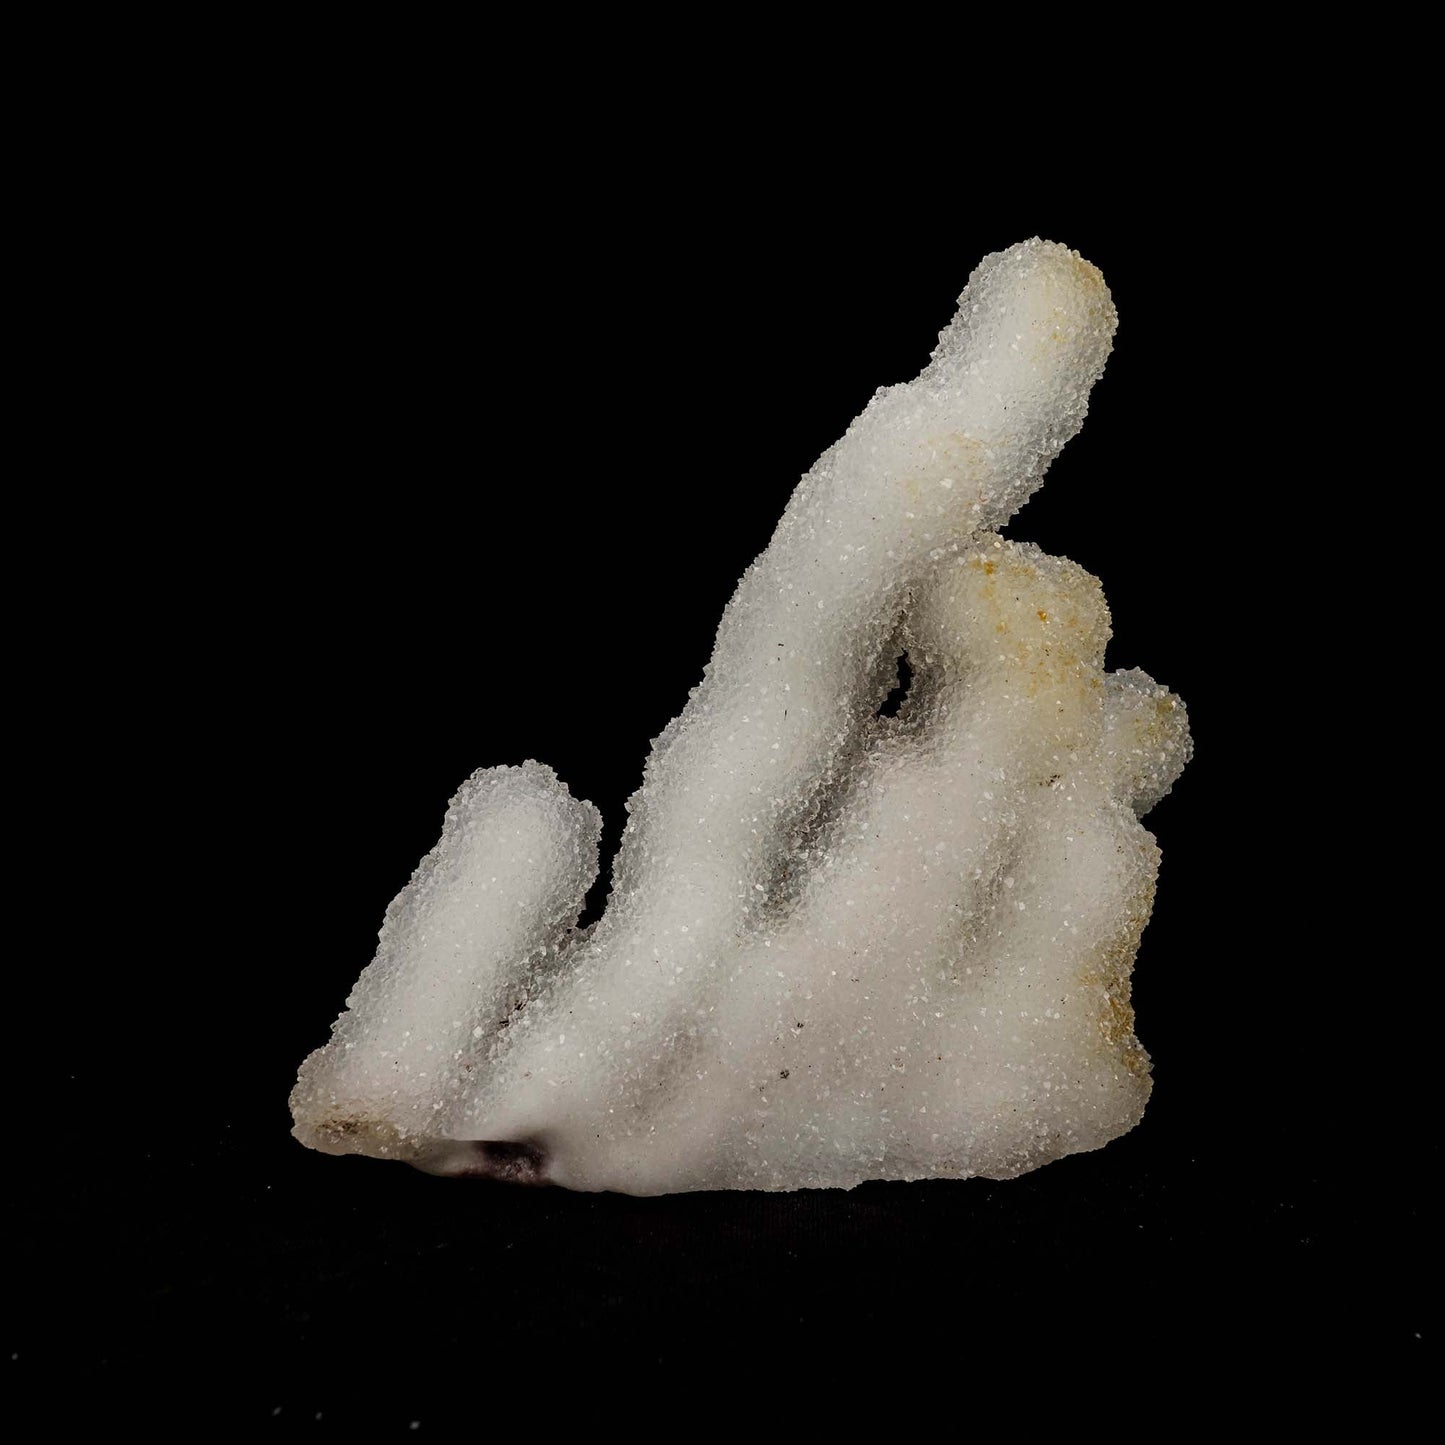 MM Quartz Stalactite Natural Mineral Specimen # B 5196  https://www.superbminerals.us/products/mm-quartz-stalactite-natural-mineral-specimen-b-5196  Features: A very aesthetic specimen of transparent clear&nbsp; Quartz crystals completely covering all sides of a 5 Inch high stalactites as well as two smaller adjoining stalactites, making for great symmetry. A beautiful showy piece in excellent condition. Primary Mineral(s): MM Quartz Secondary Mineral(s): N/A